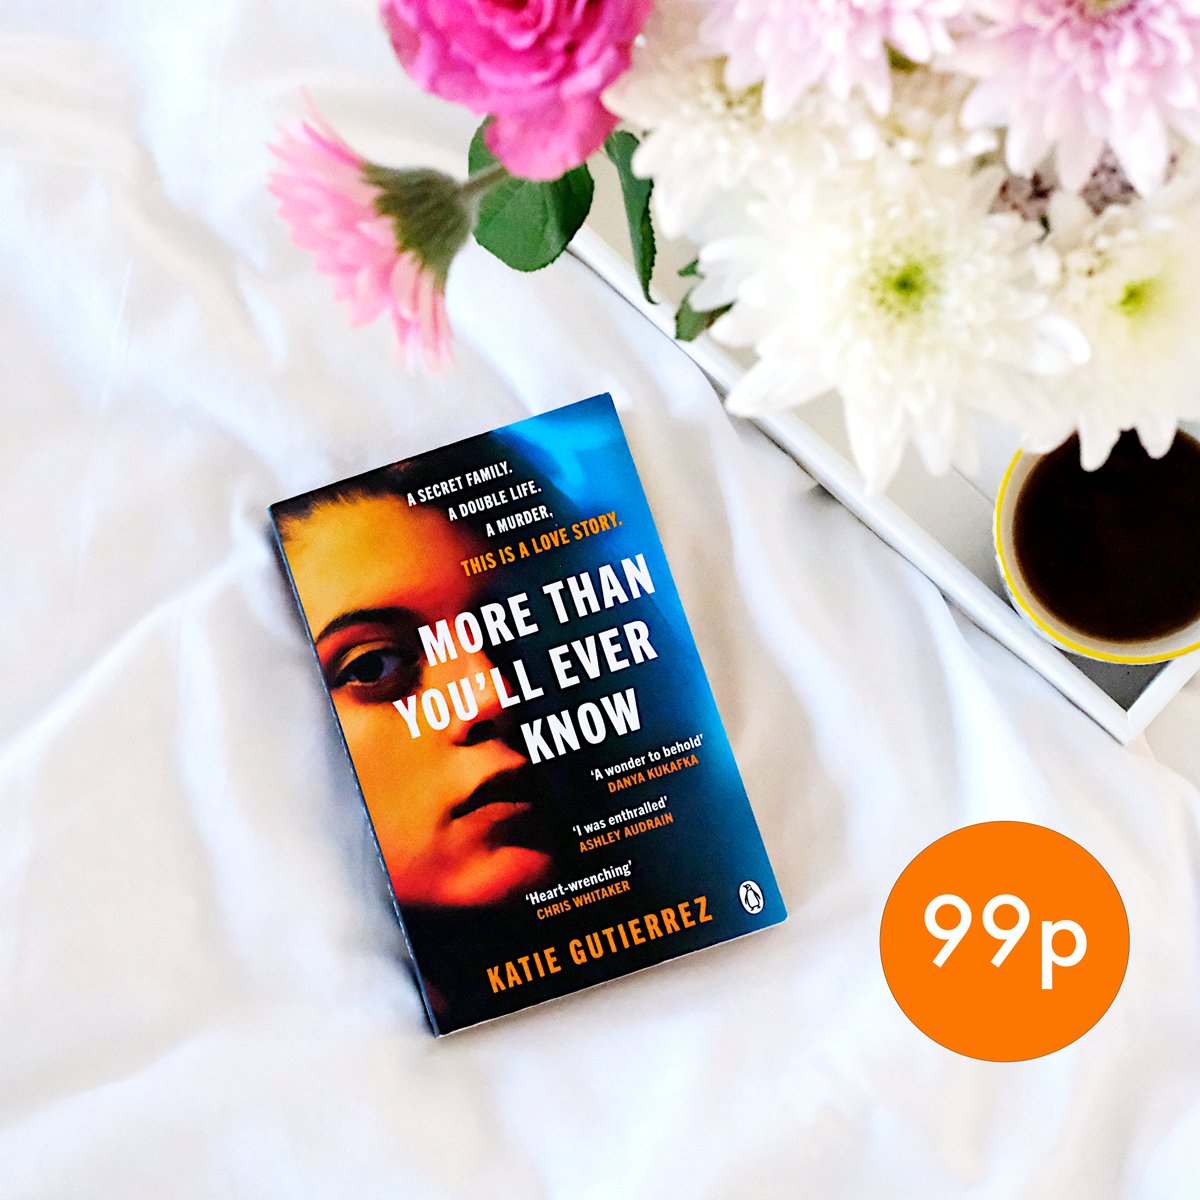 A secret family. A double life. A murder. This is a love story. Read @katie_gutz's stunning debut More Than You’ll Ever Know now for just 99p!: bit.ly/3RIM0fD